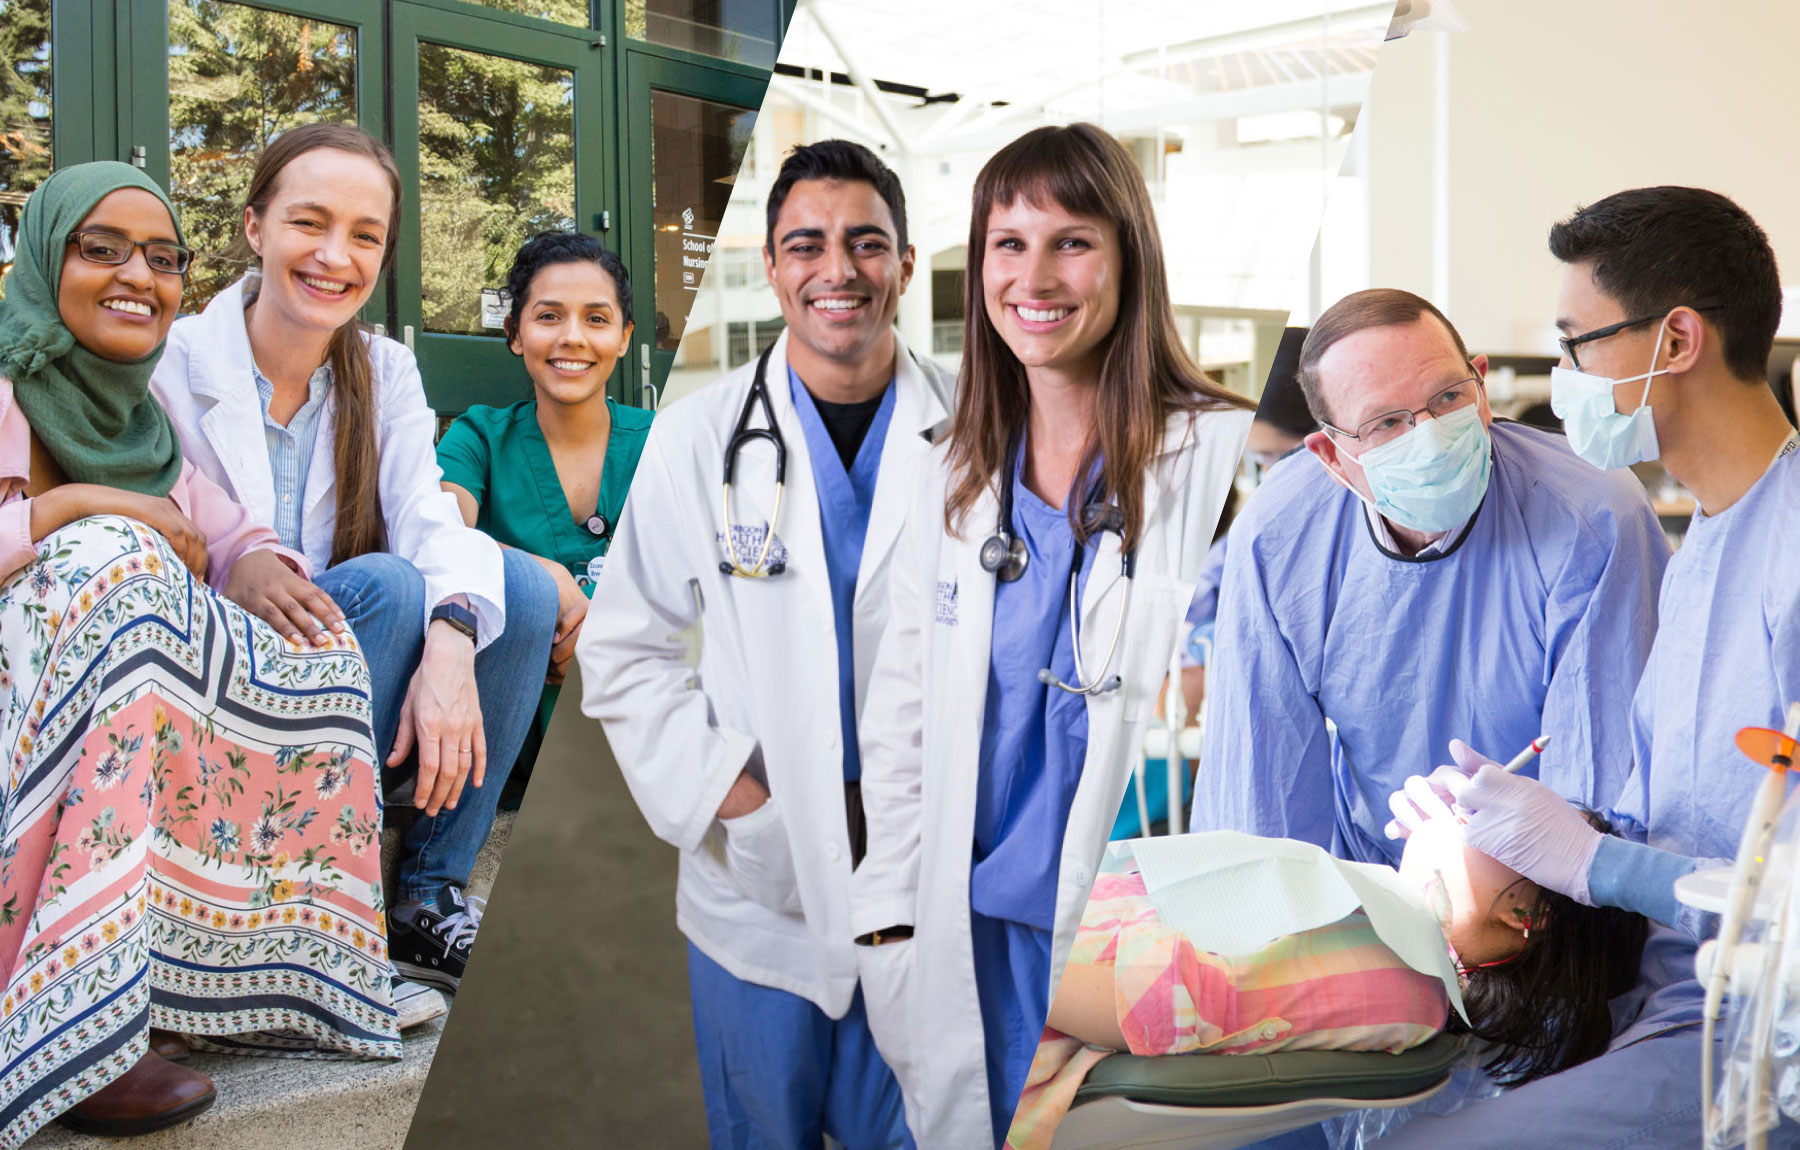 A composite photo of students from the OHSU School of Nursing, School of Medicine and School of Dentistry